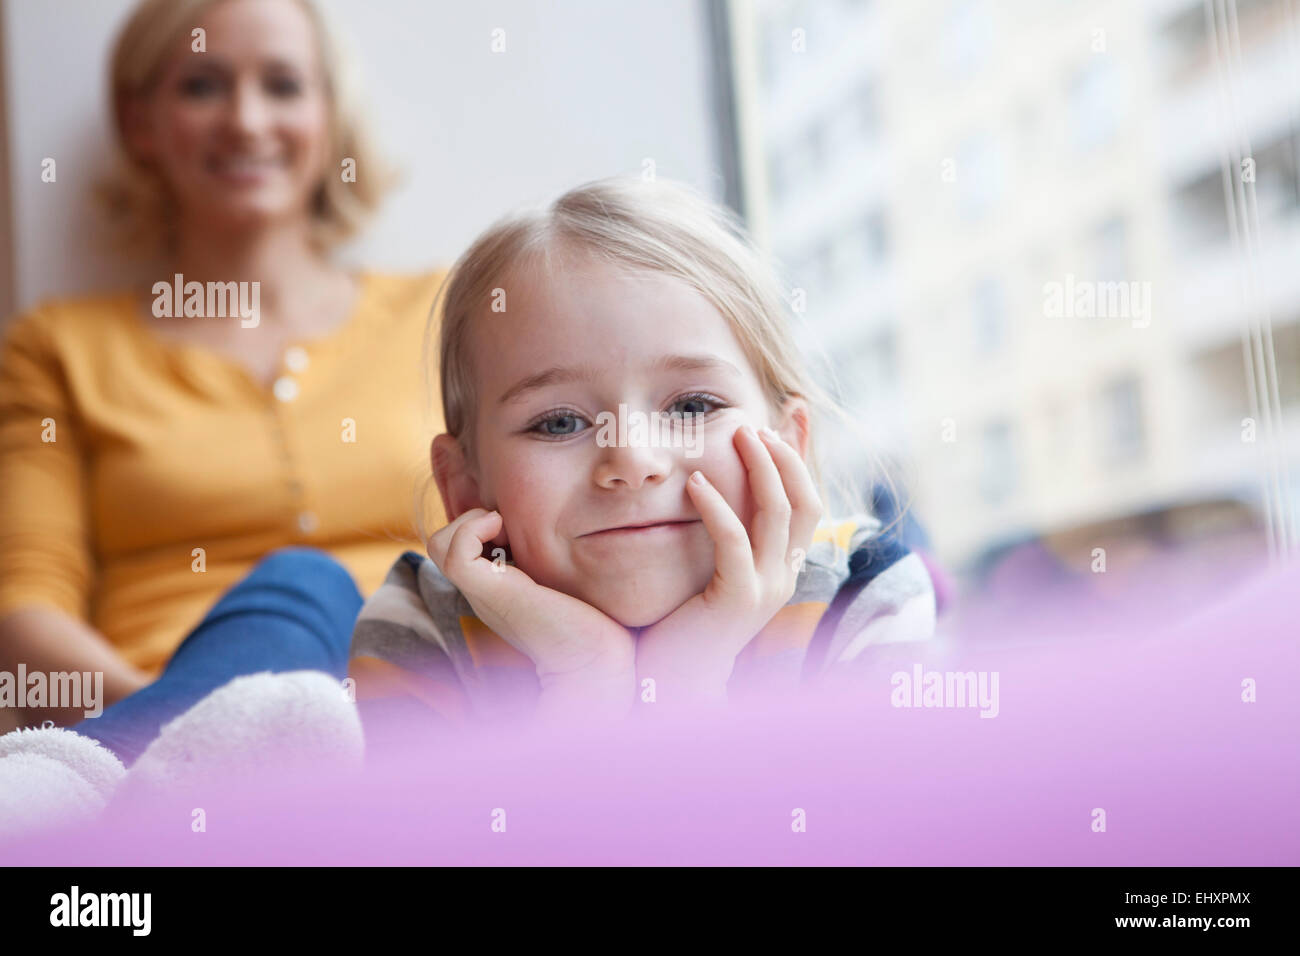 Smiling girl with mother in background Stock Photo